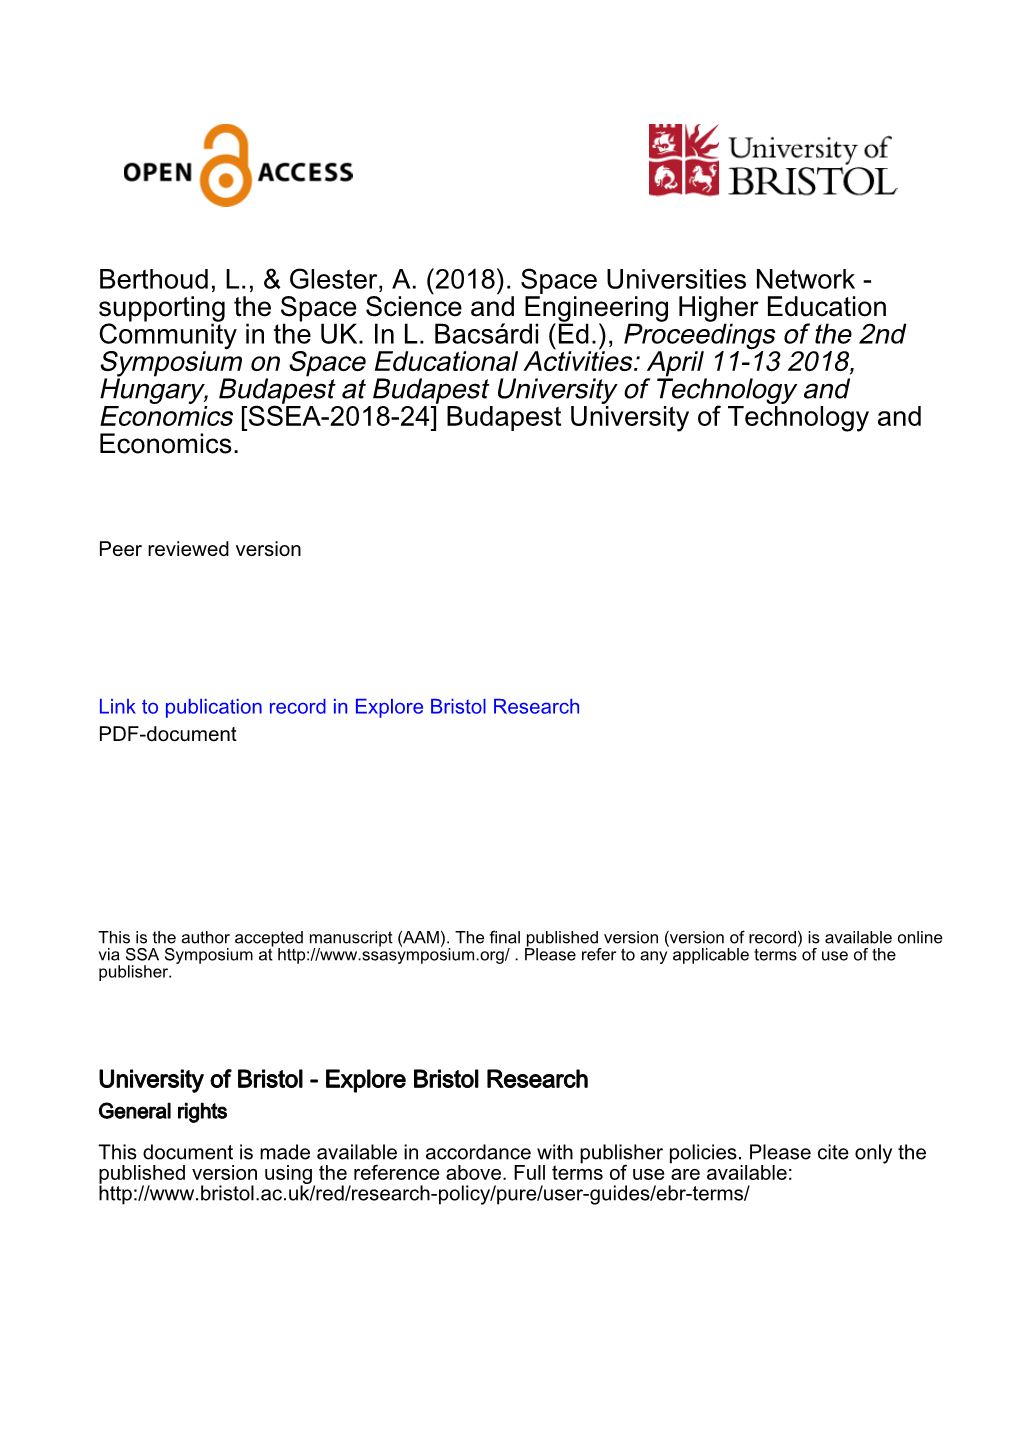 Berthoud, L., & Glester, A. (2018). Space Universities Network